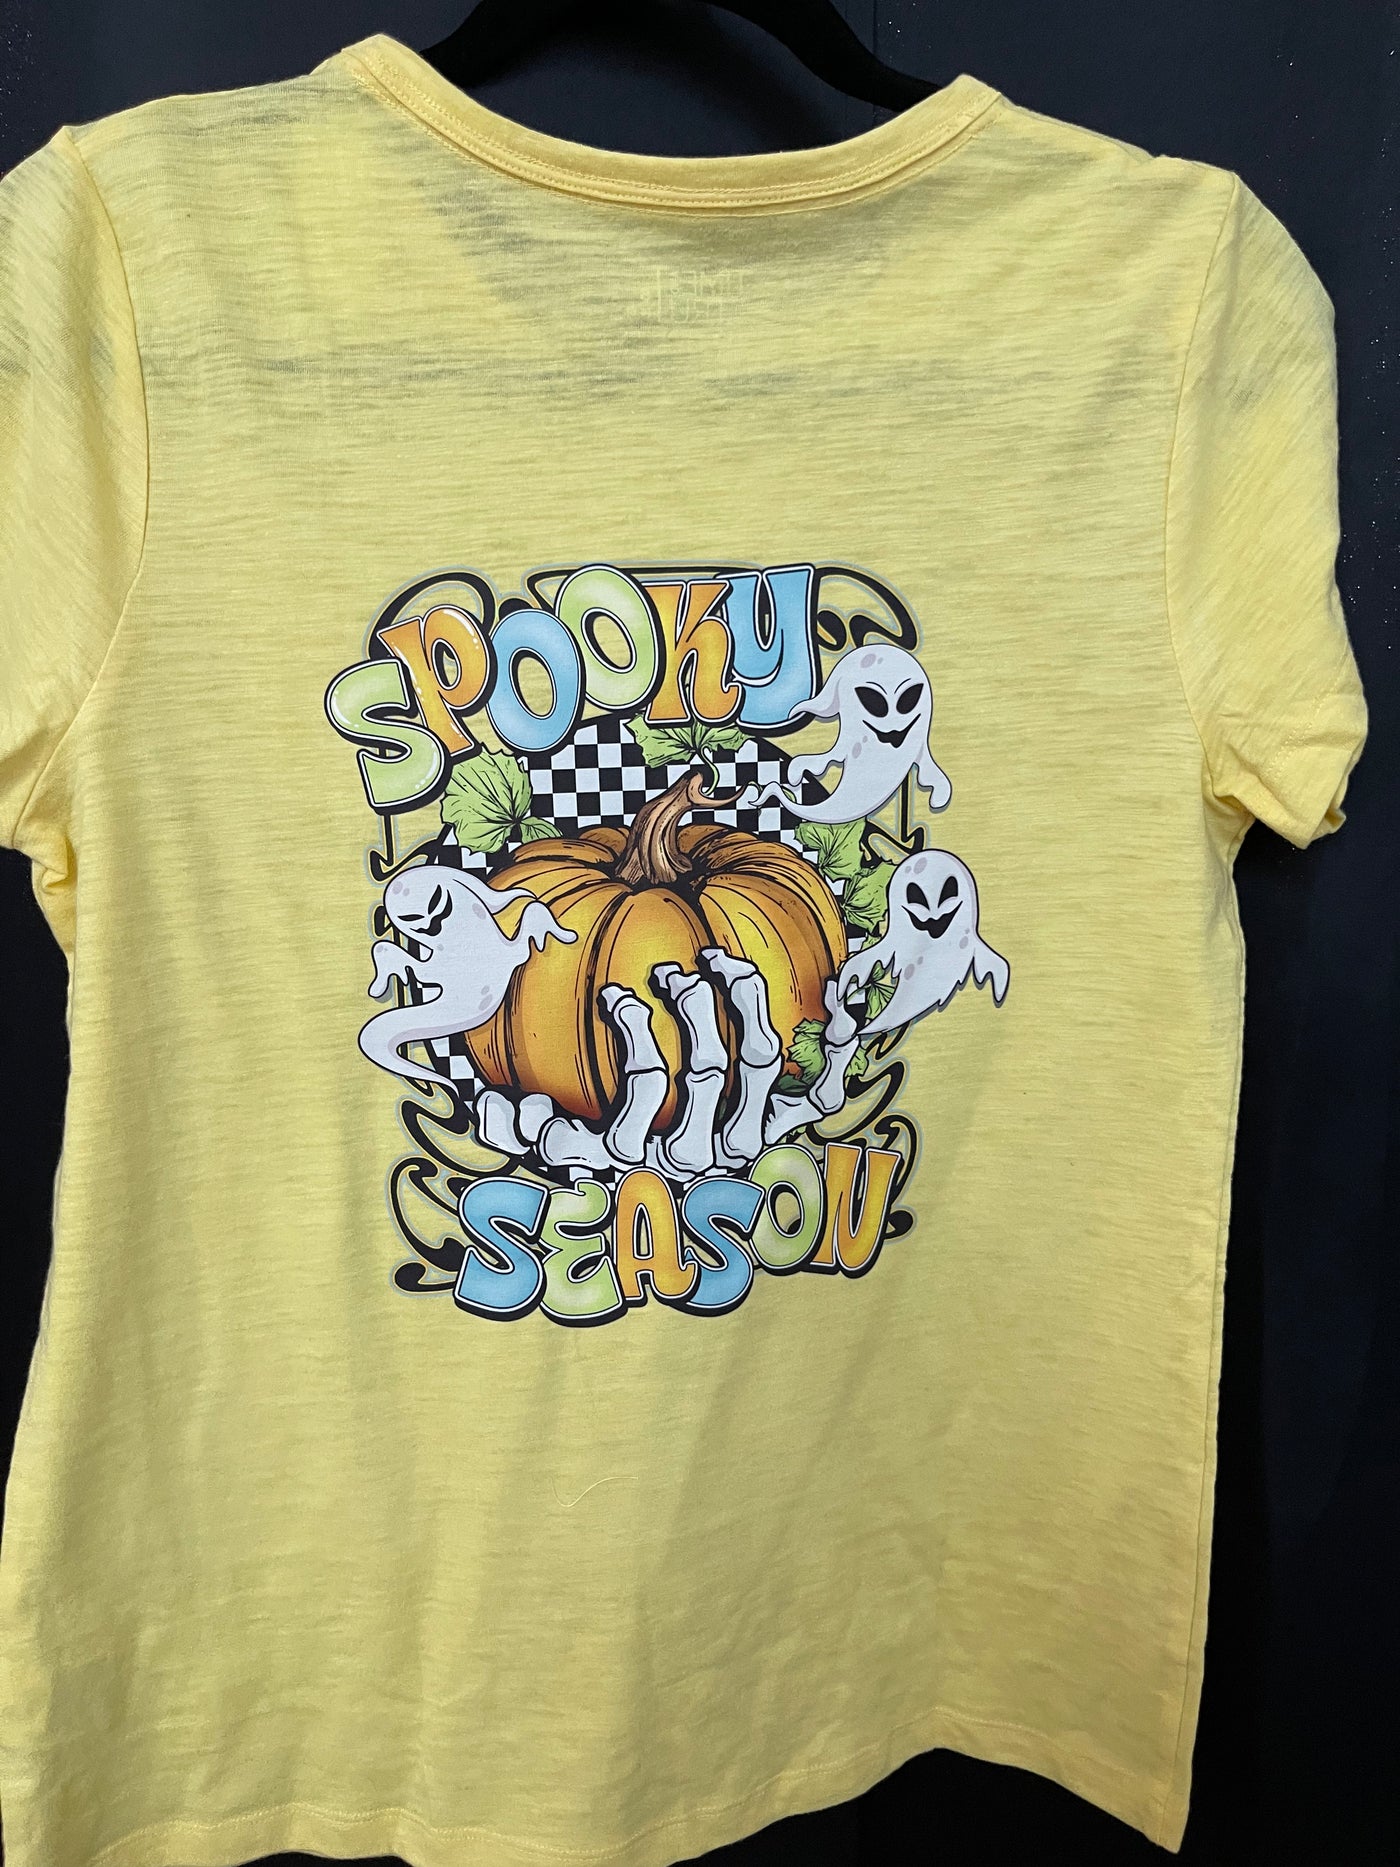 Decorated T-Shirt Ladies Cut Small Spooky